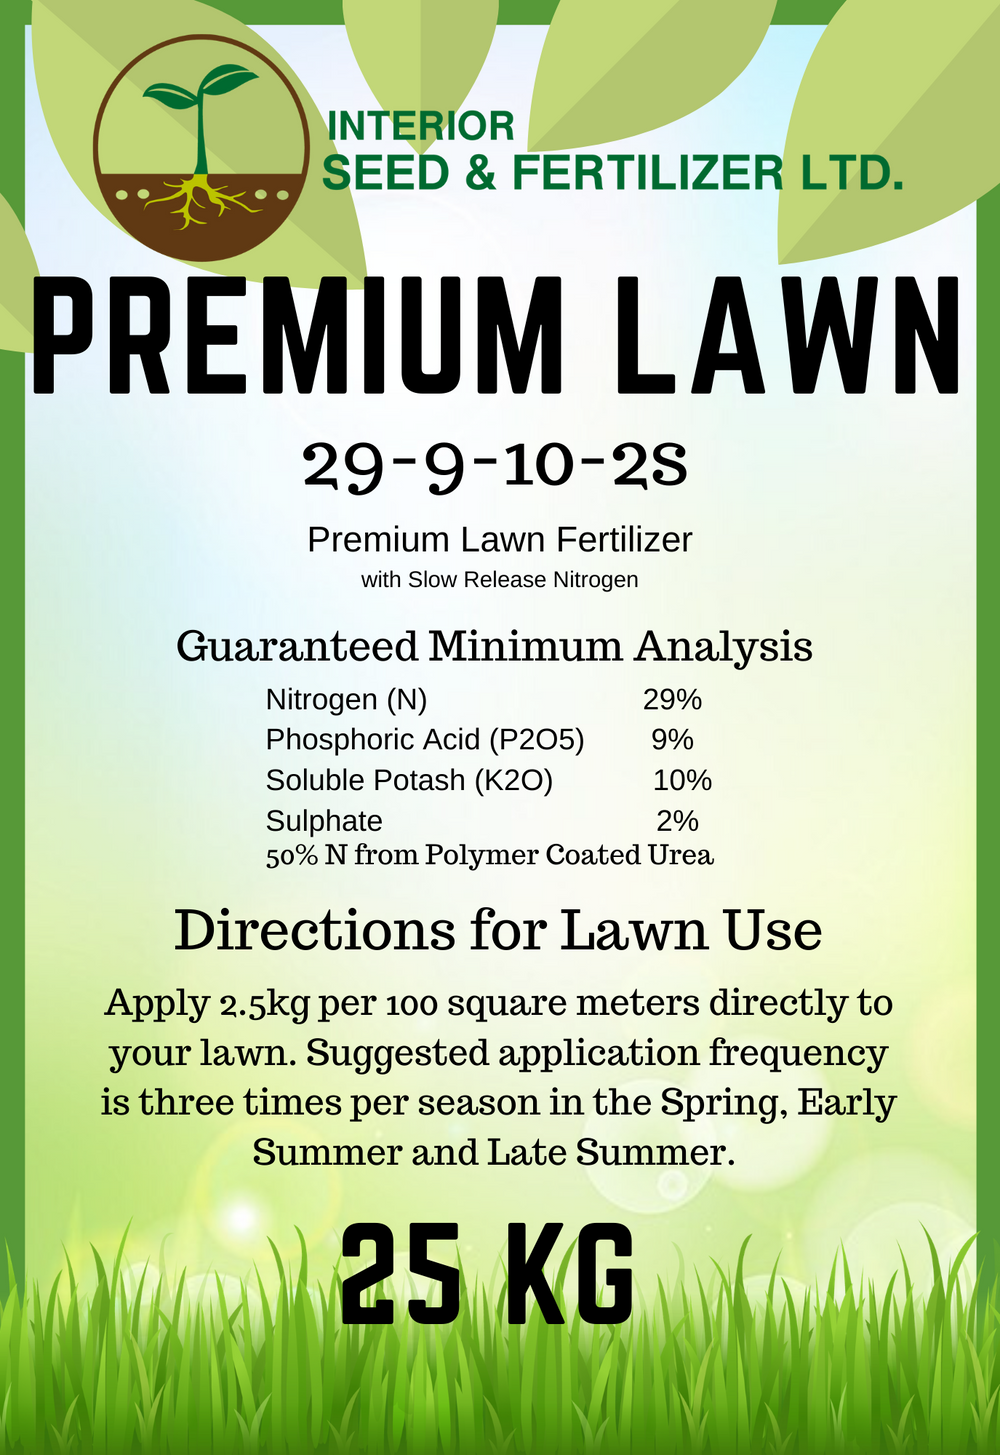 The gold standard for lawn fertilizer. Premium Lawn will keep your lawn lush, green and the envy of the neighborhood. The slow release nitrogen will keep your lawn feed for up to 45+ days. From Interior Seed and Fertilizer Garden Center and Nursery Cranbrook BC